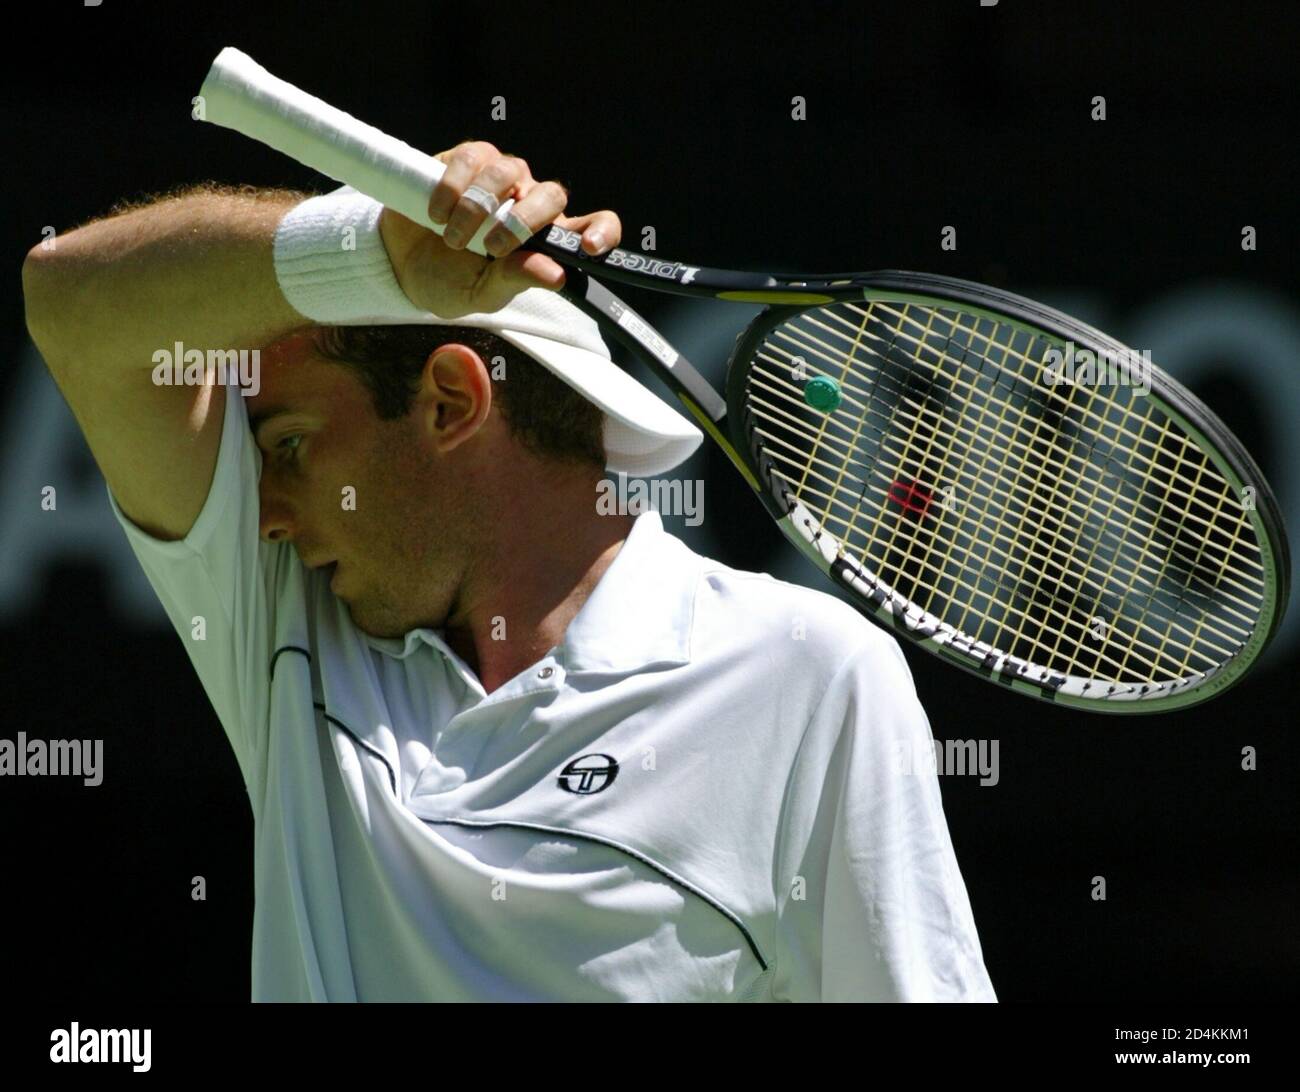 Italy's Filippo Volandri reacts during his second round match against third  seed Juan Carlos Ferrero of Spain at the Australian Open tennis  championship in Melbourne January 22, 2004. Ferrero won the match